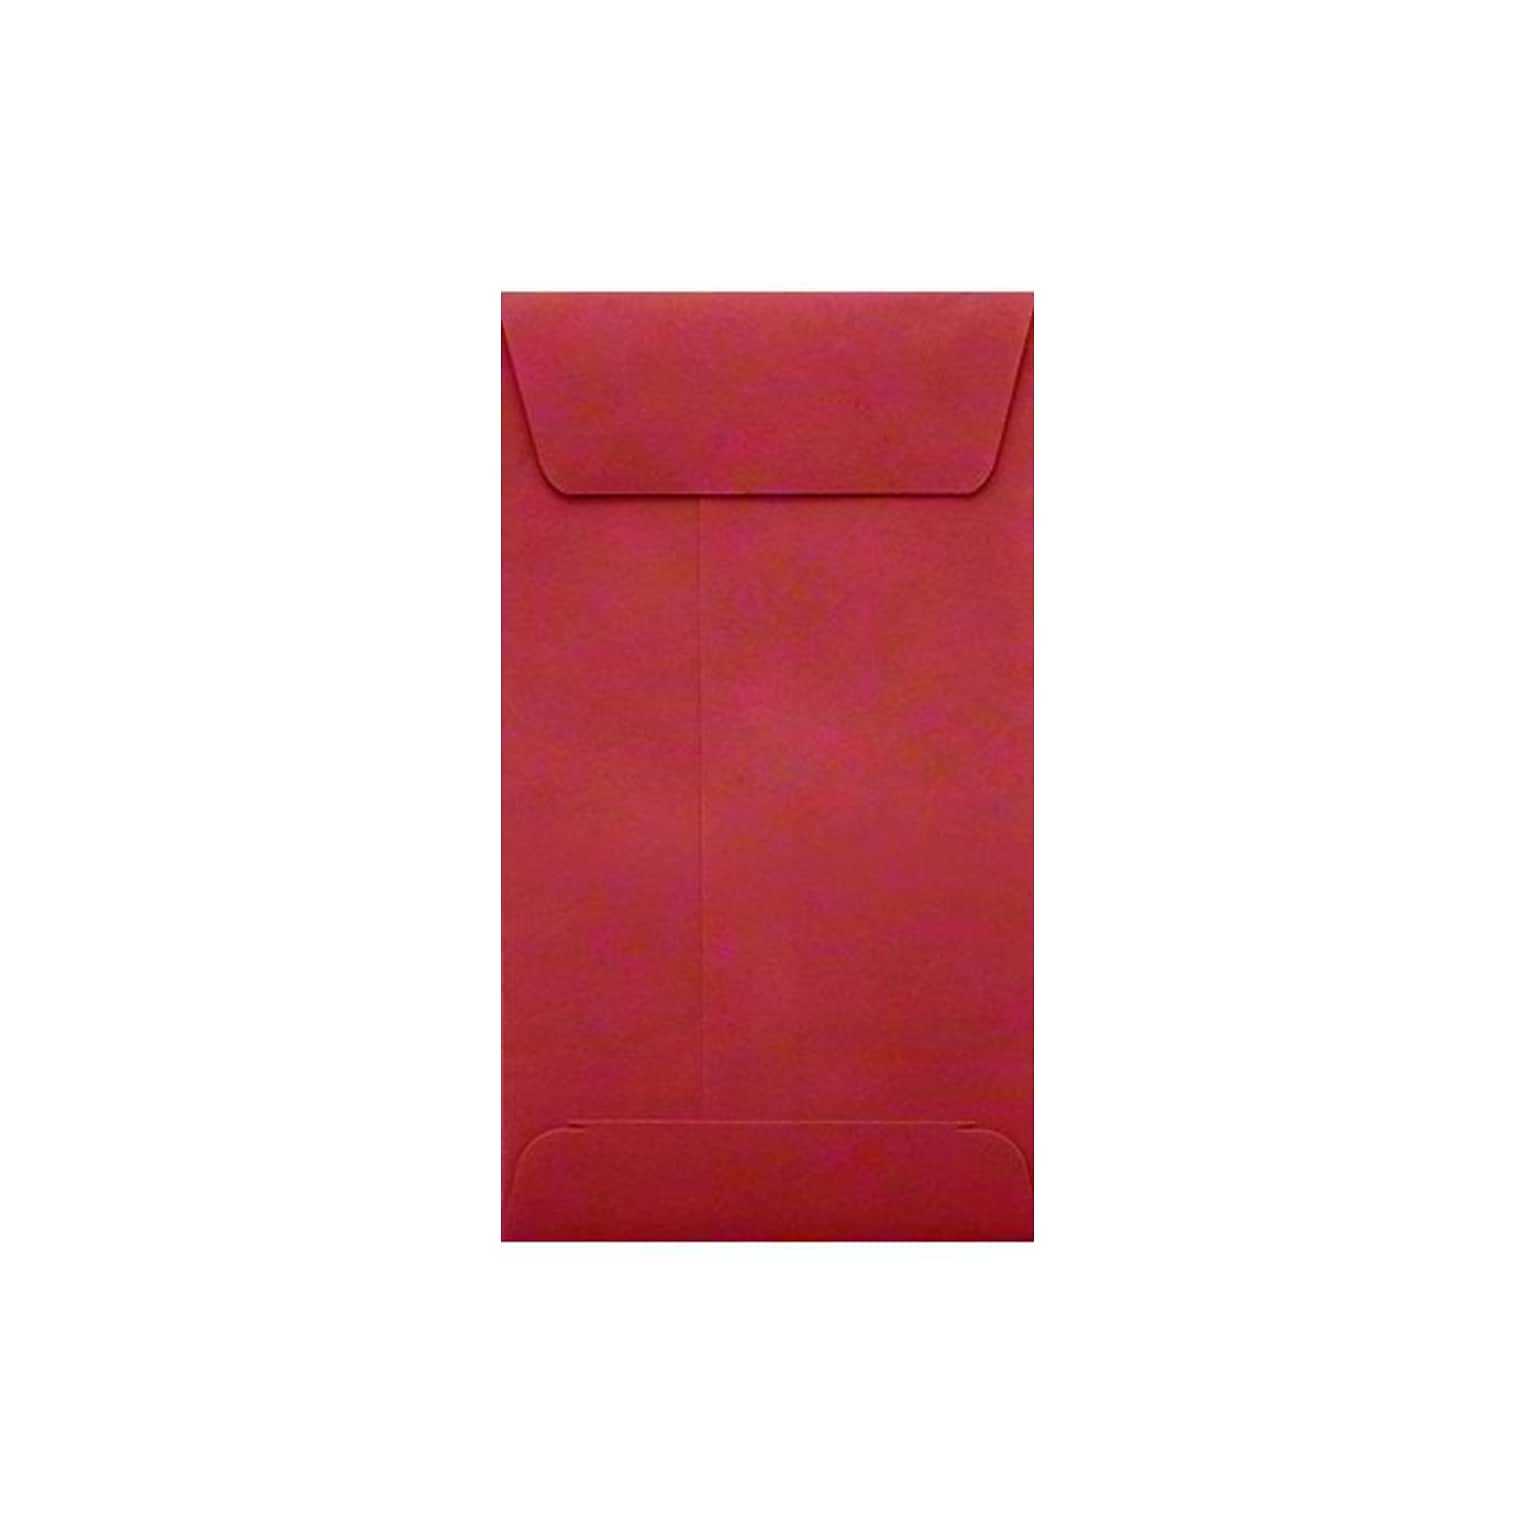 LUX #5 1/2 Coin Envelopes (3 1/8 x 5 1/2) 50/Box, Ruby Red (LUX-512CO-18-50)